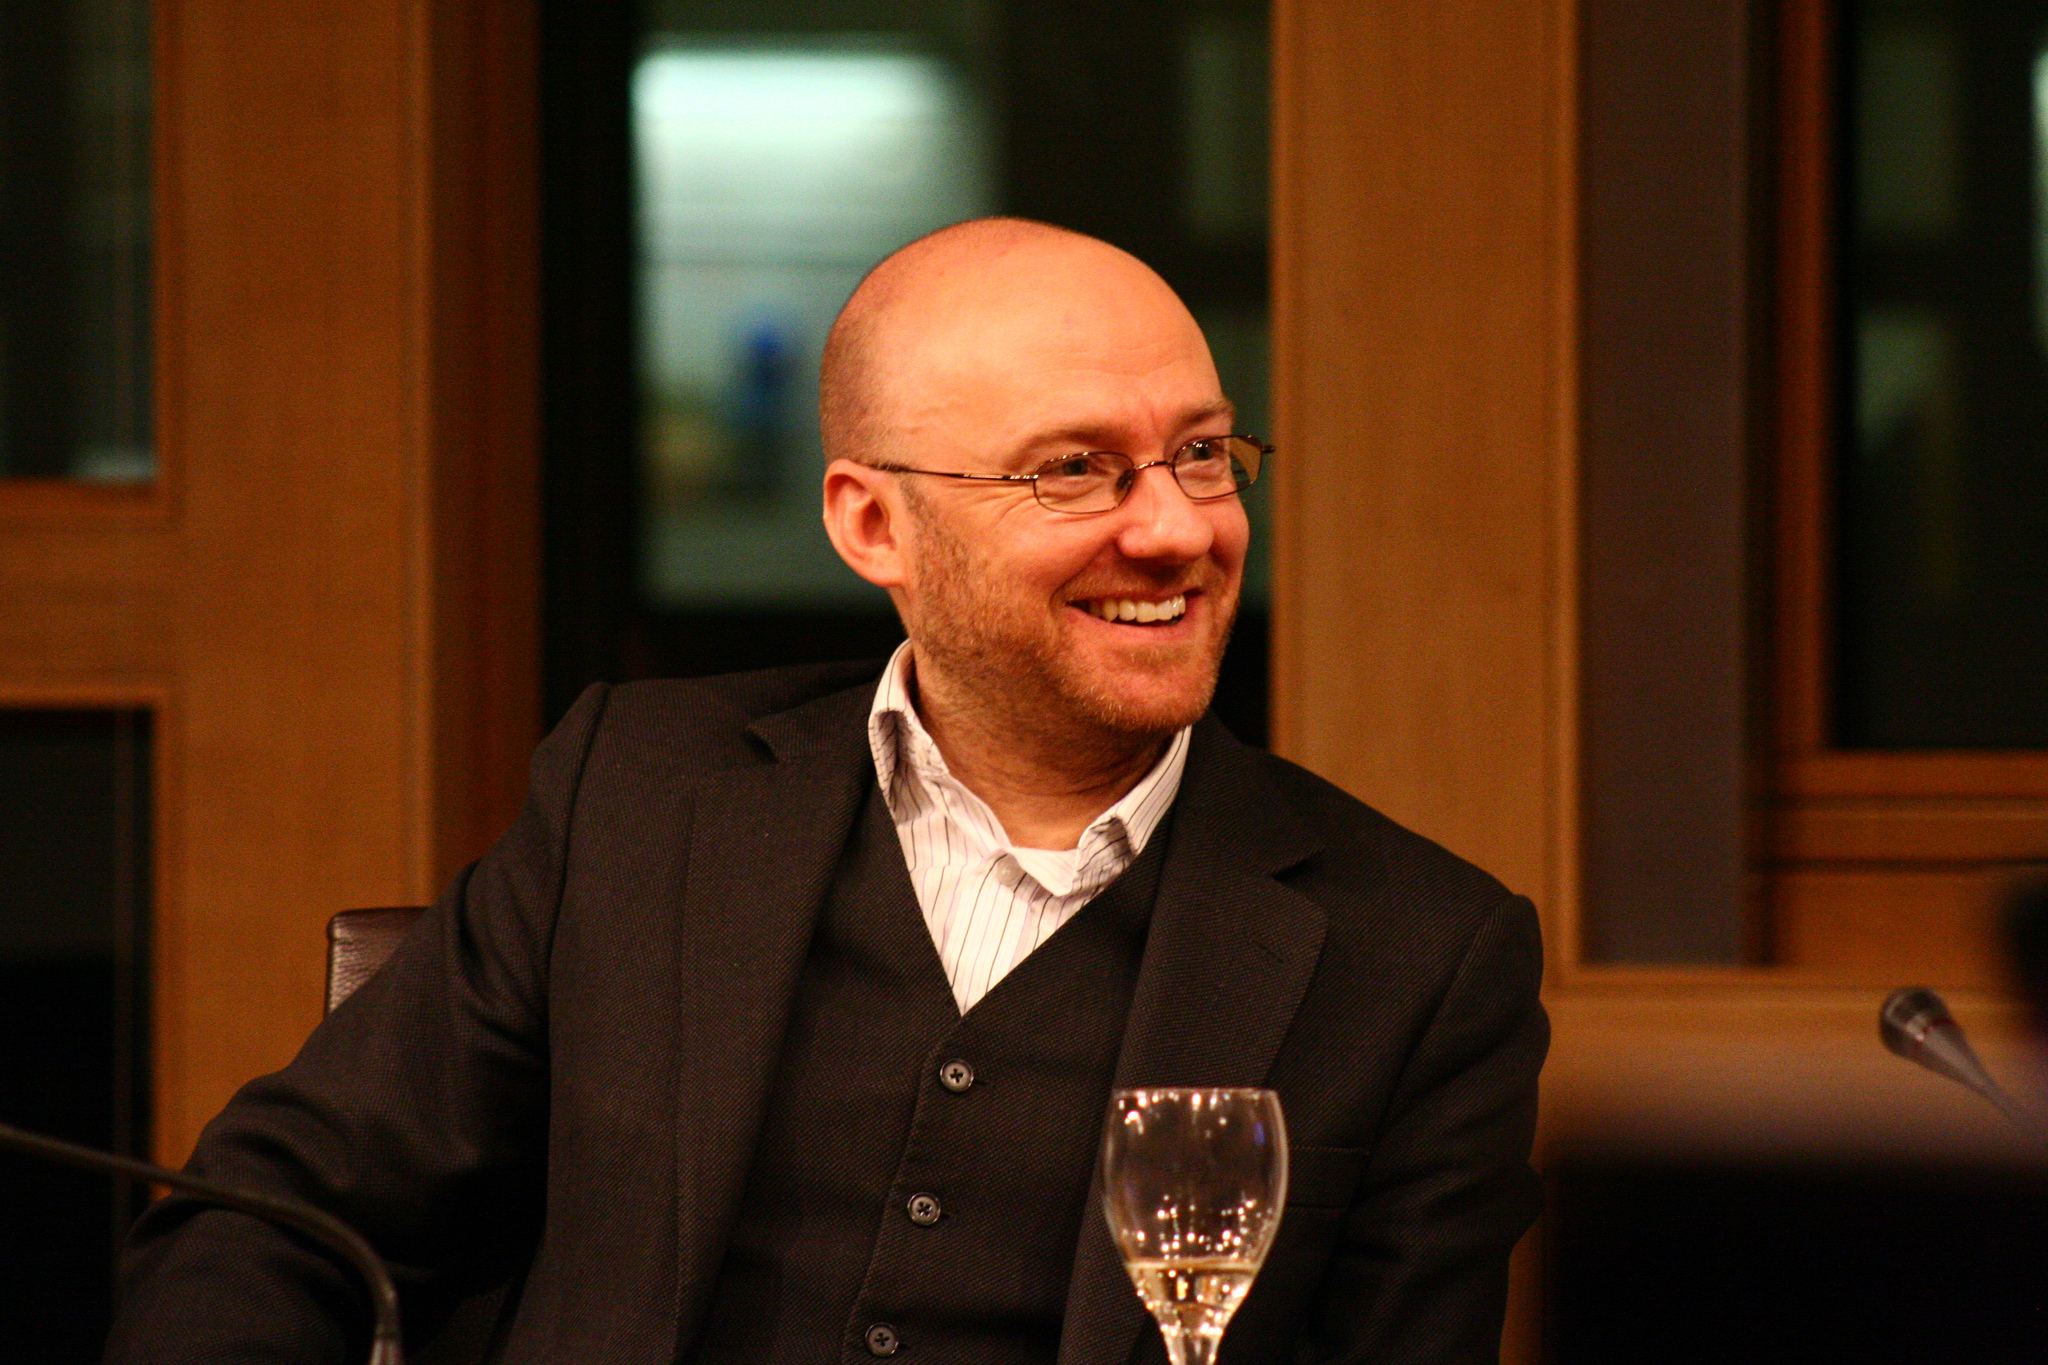 Patrick Harvie, Scottish Greens co-convener and MSP. Photo credit flickr user ICARB.org http://tinyurl.com/kyg5dog Creative Commons license: https://creativecommons.org/licenses/by-nc-sa/2.0/